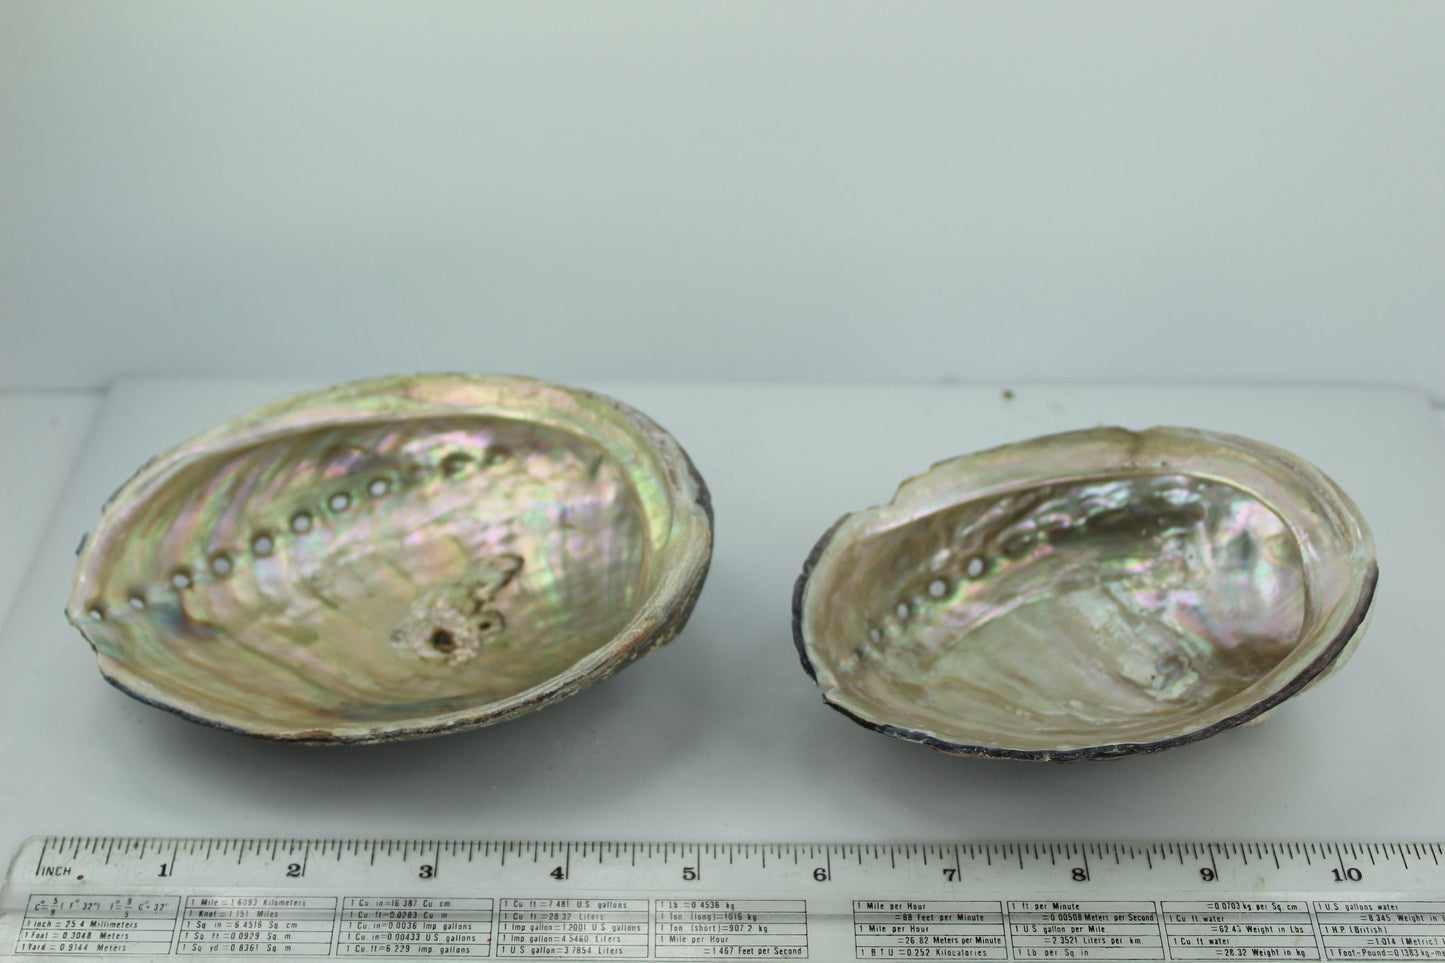 Black Abalone Shells 2 Vintage Rainbow Iridescent  5 1/4"  5" Estate Collection Shell Art Collectibles colorful